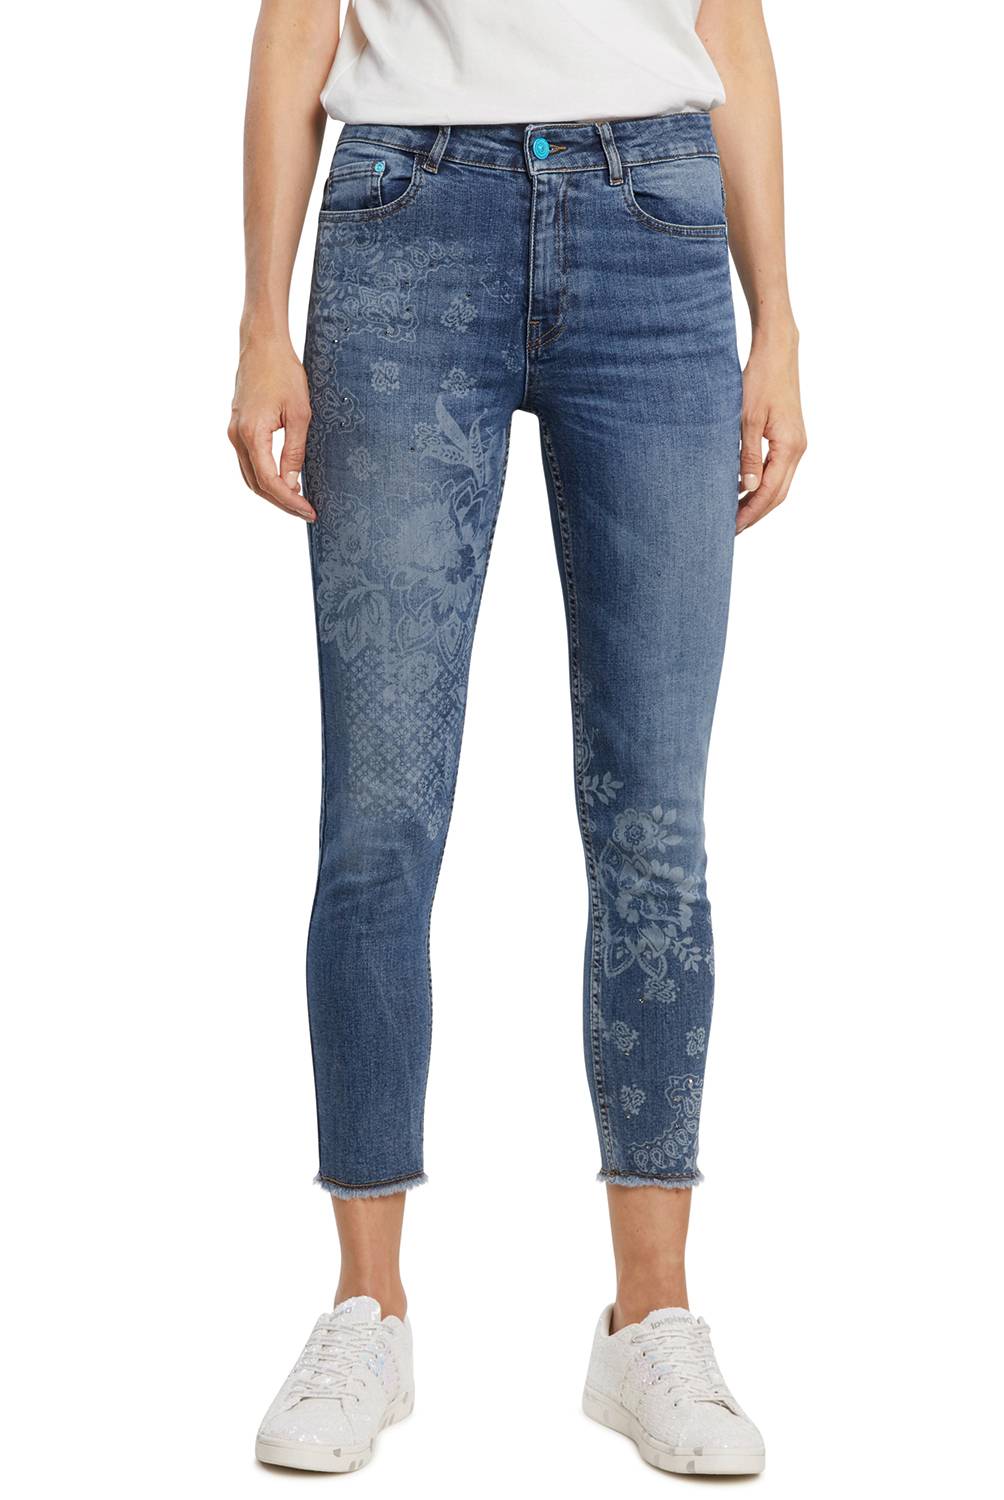 DESIGUAL - Jeans Mujer